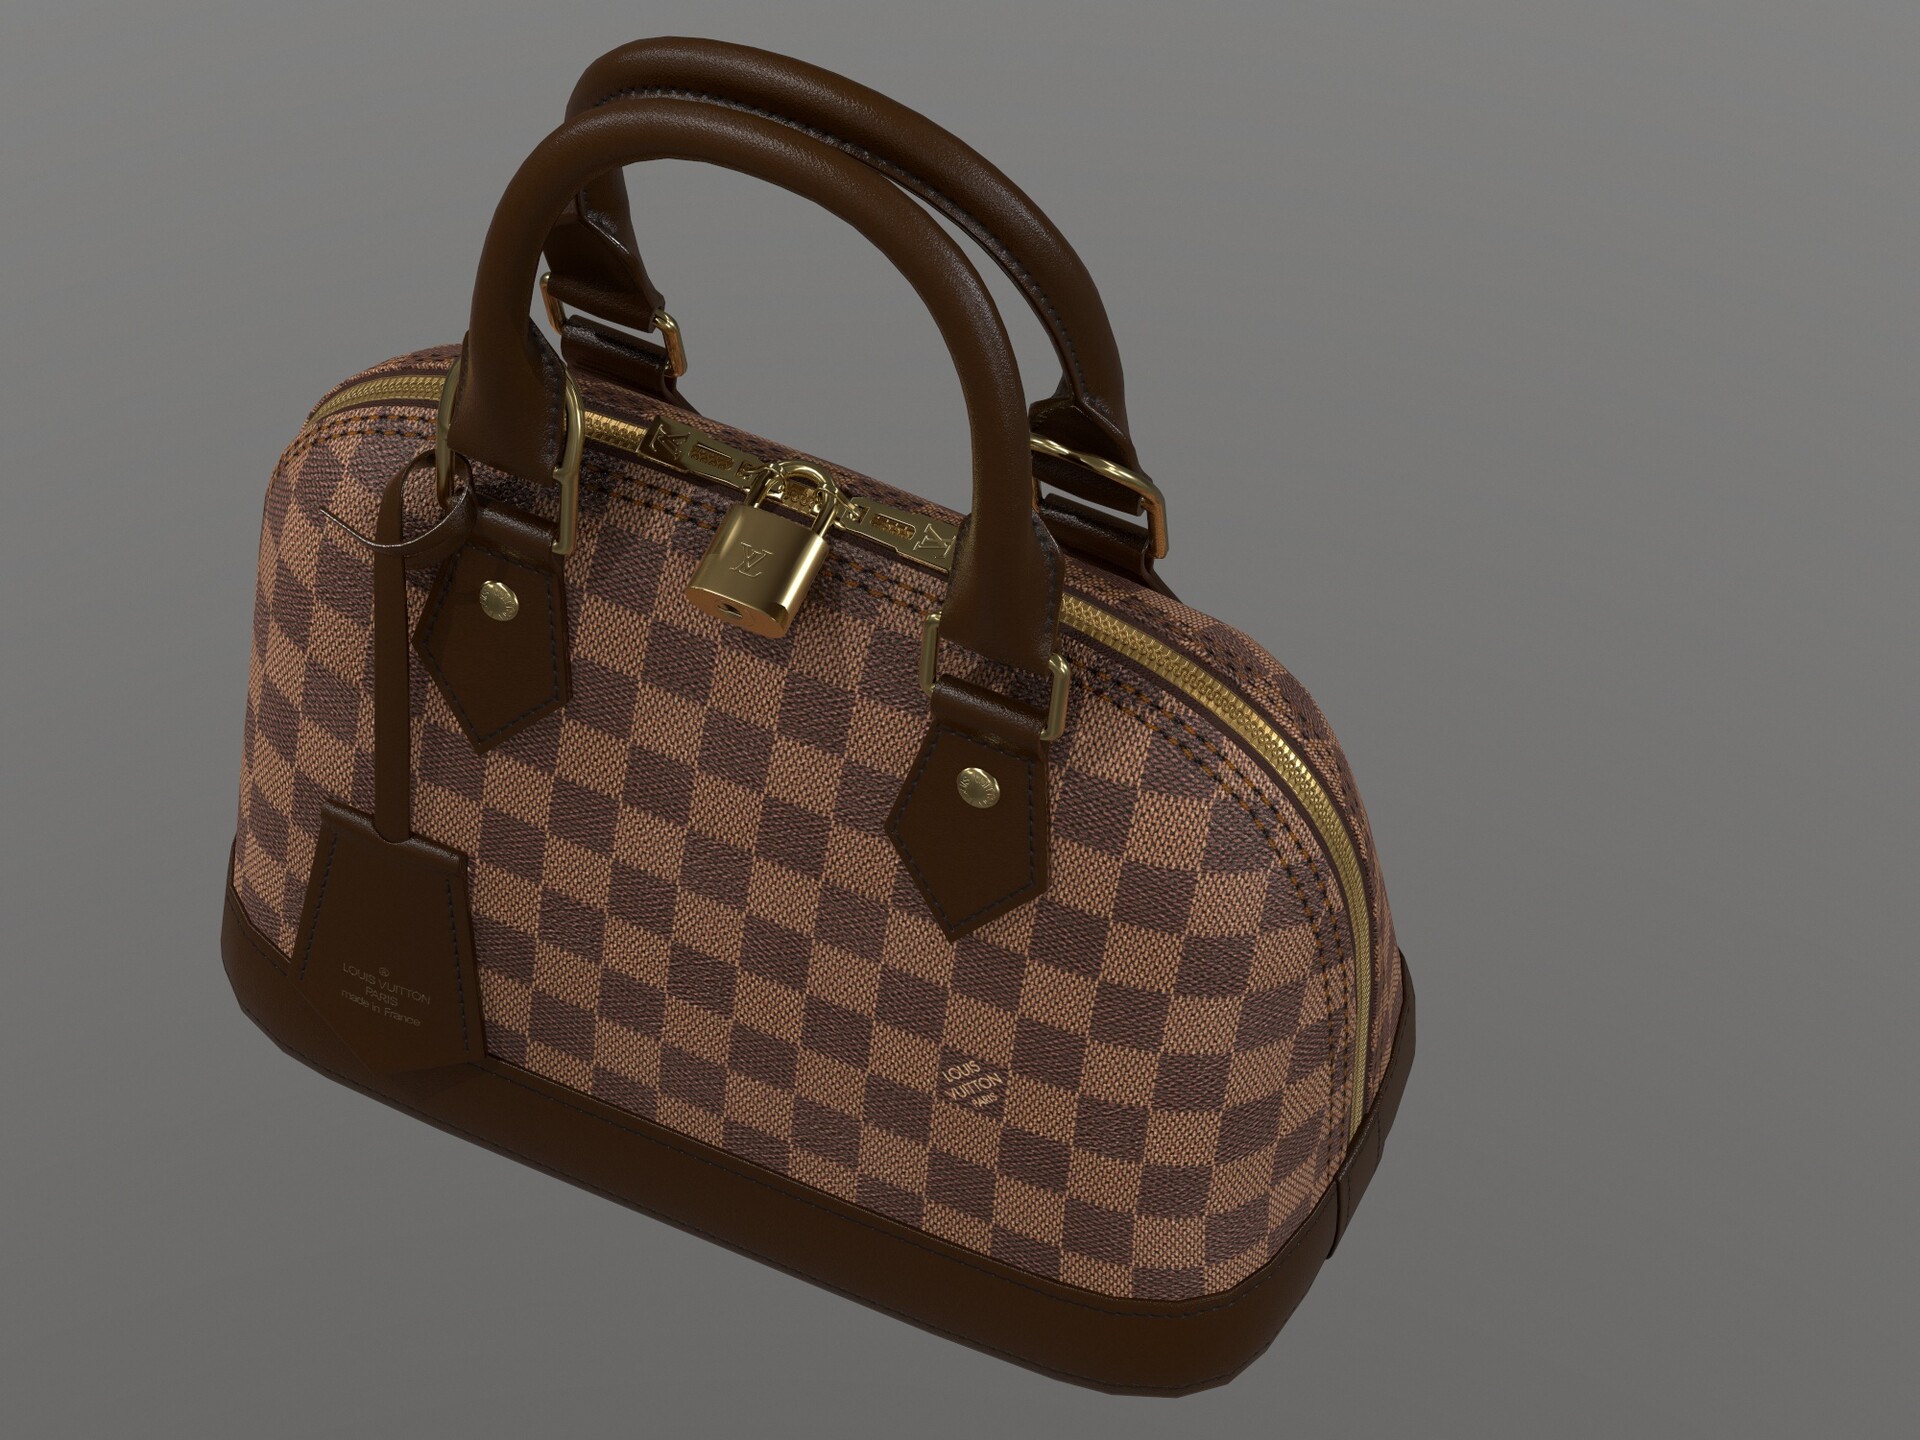 3D model Louis Vuitton Alma BB Top Handle Bag in Epi Leather Spring VR / AR  / low-poly